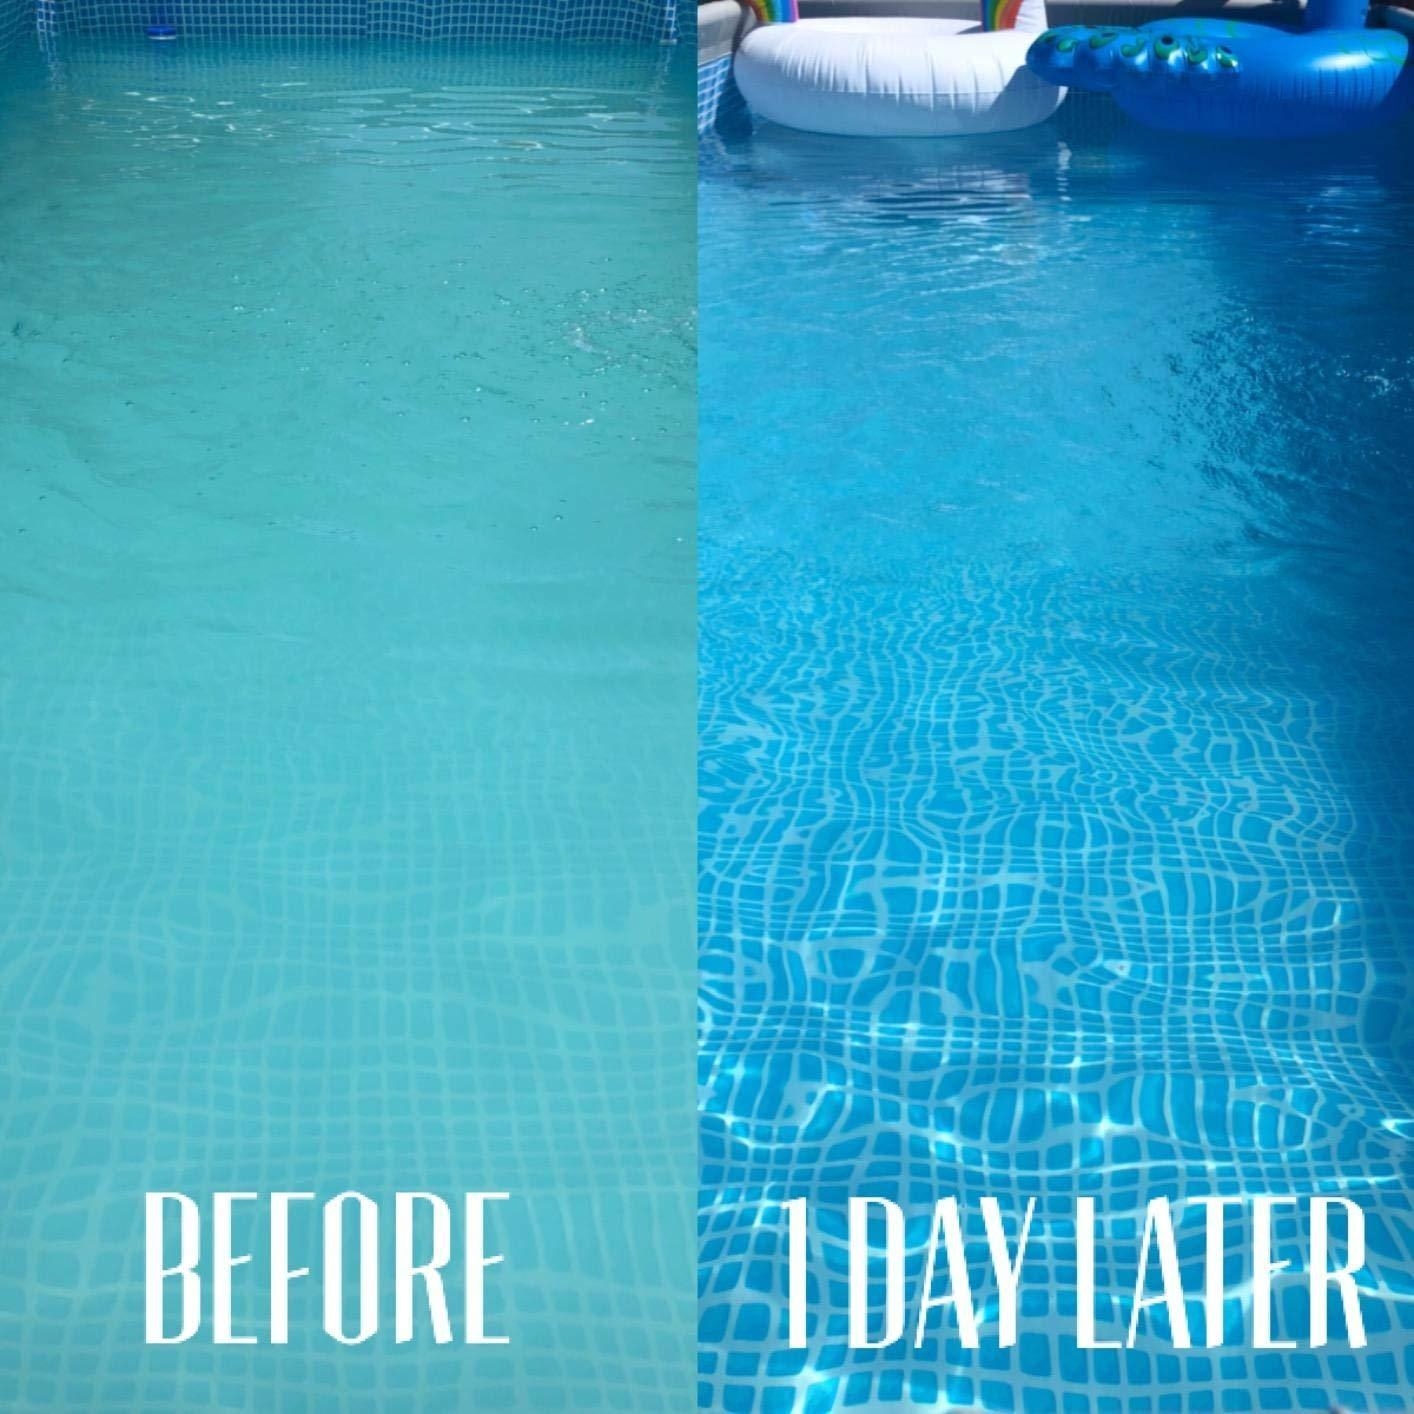 reviewer before and after images of a pool: before, the water is green-ish and cloudy; after, the water is crystal clear